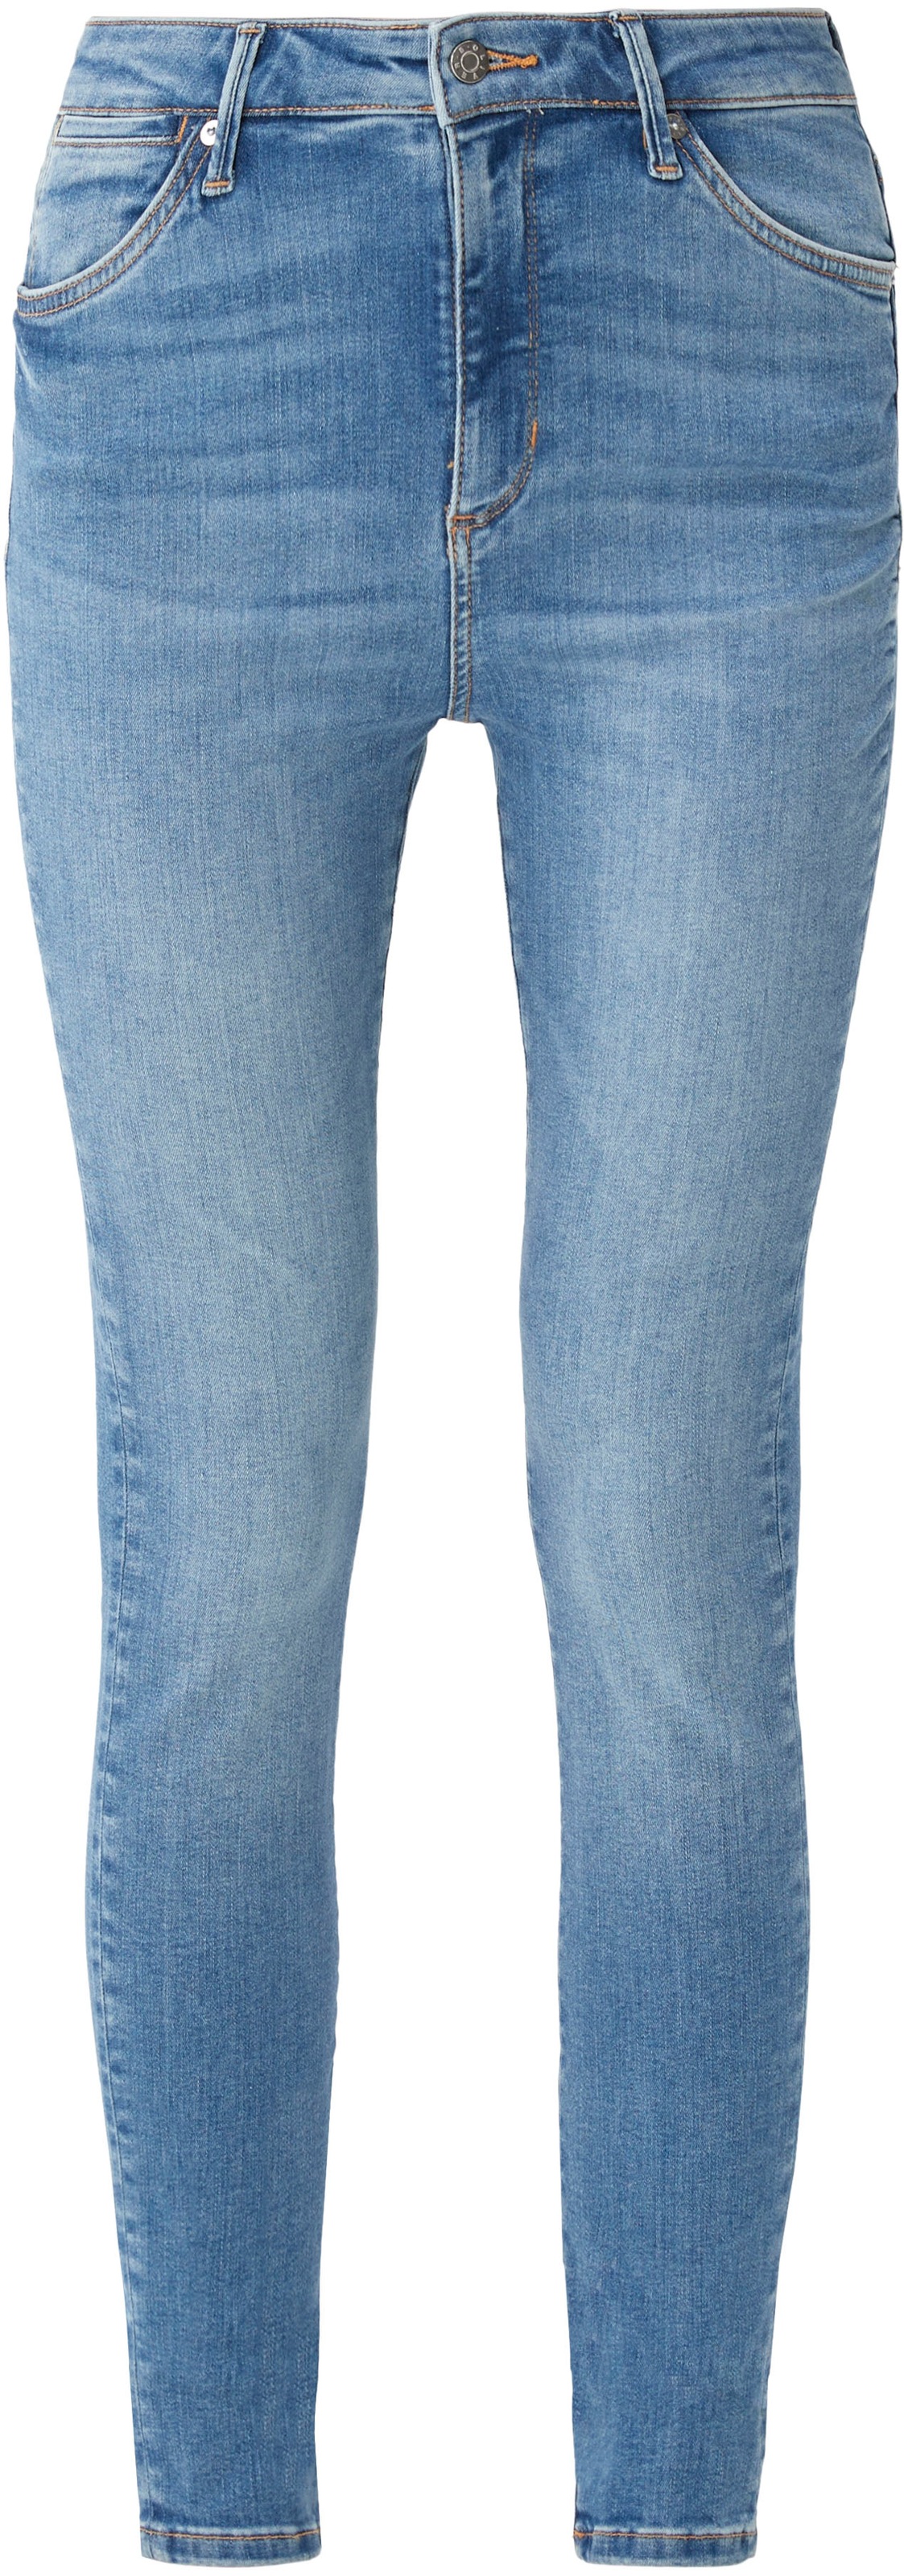 s.Oliver Skinny-fit-Jeans »Anny«, High Rise online bei OTTO